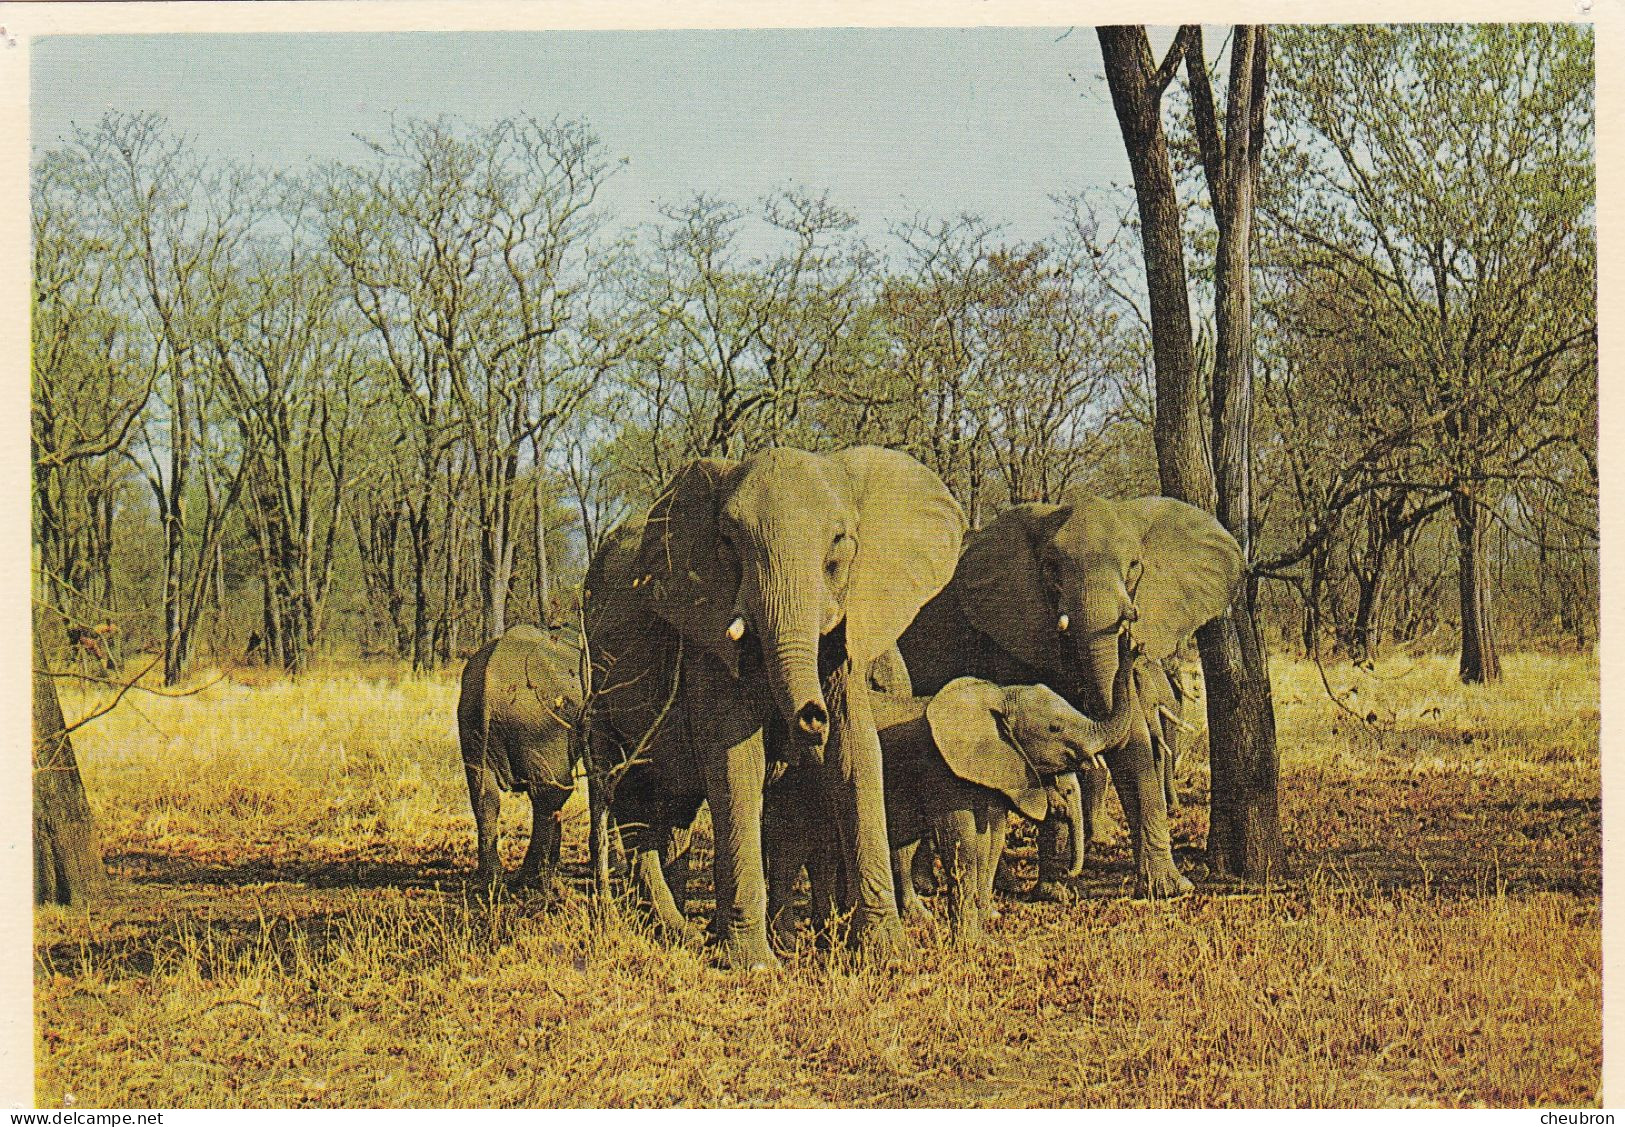 ANIMAUX & FAUNE.  CPSM. ELEPHANTS."HERD OF ELEPHANTS AND THEIR CALVES "  AFRIQUE DU SUD. NATURAL GAME RESERVES - Elephants